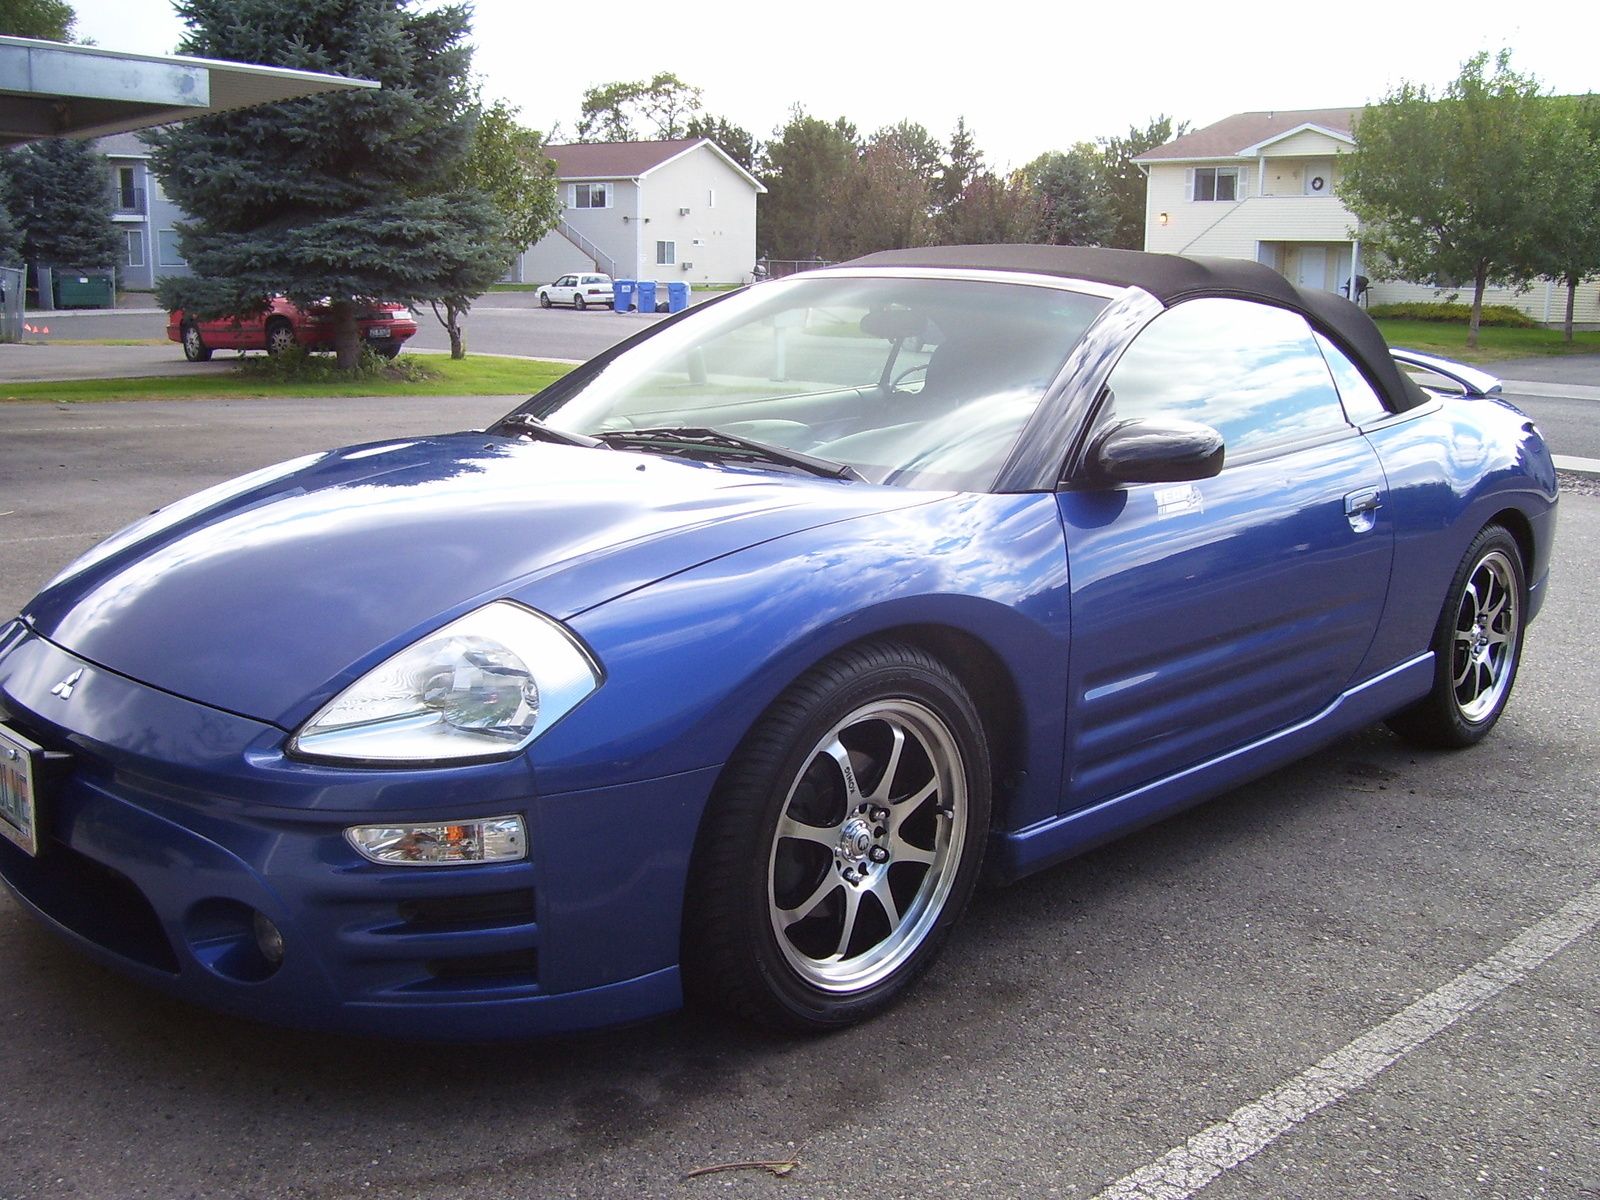 2005 Mitsubishi Eclipse: The affordable sports car.